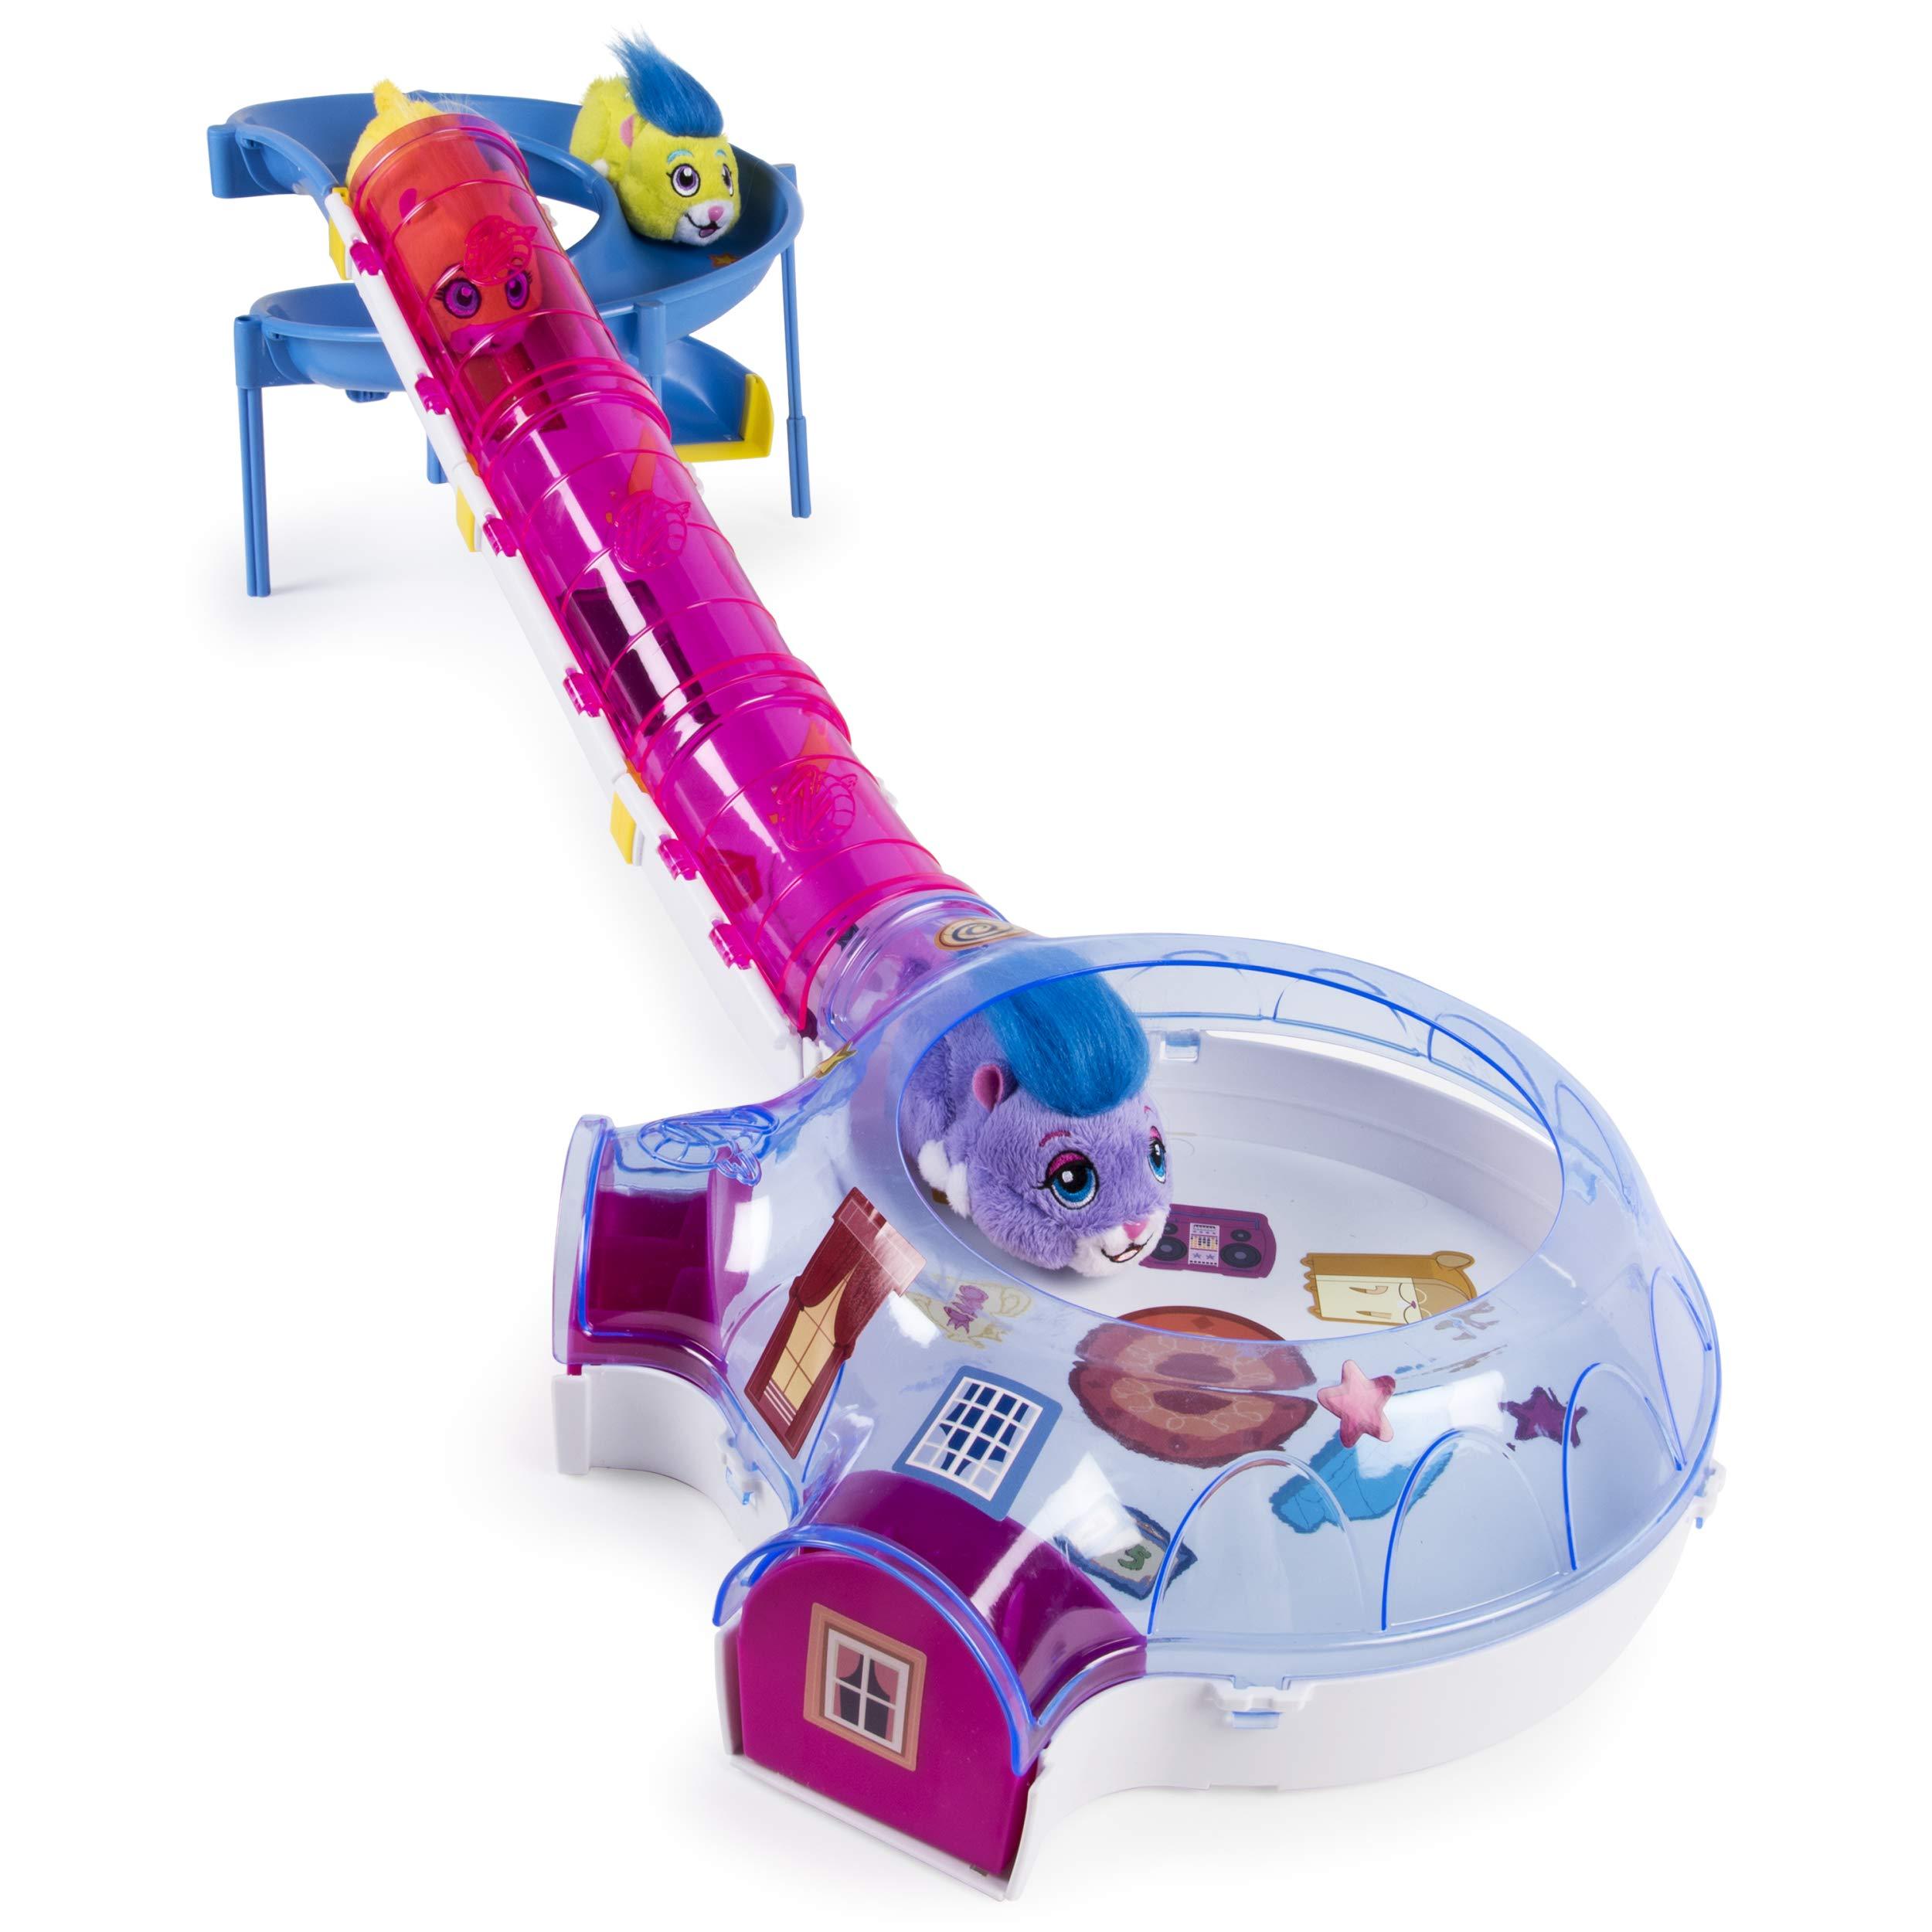 Zhu Zhu Pets – Hamster House Play Set with Slide and Tunnel - image 4 of 8